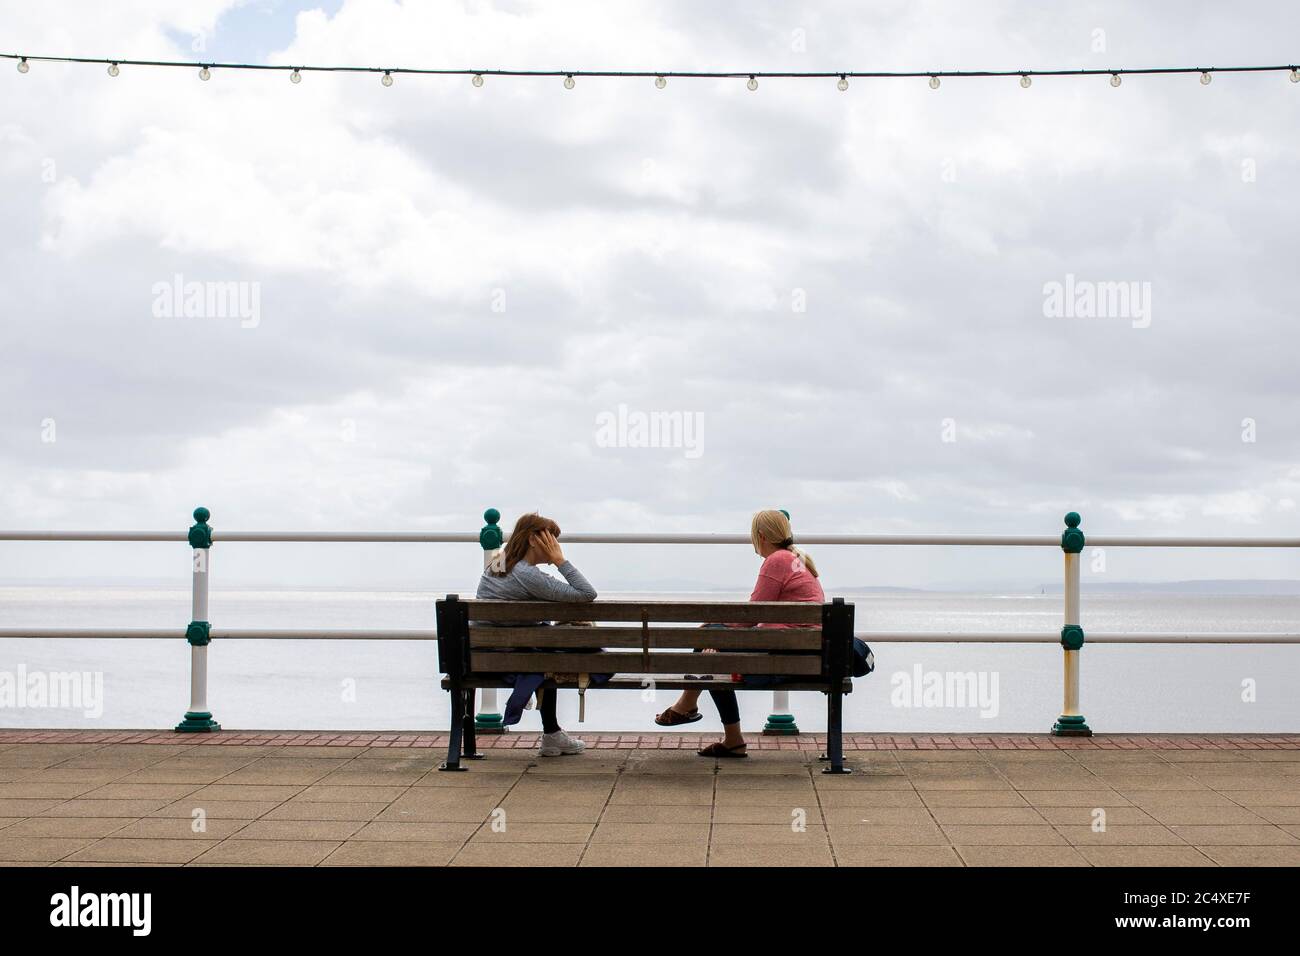 Penarth, Wales, UK. 29th June, 2020. Two women talk on a bench on Penarth promenade in the Vale of Glamorgan as the Welsh Government announces that two households will be able to form one 'extended household' from next Monday. Credit: Mark Hawkins/Alamy Live News Stock Photo